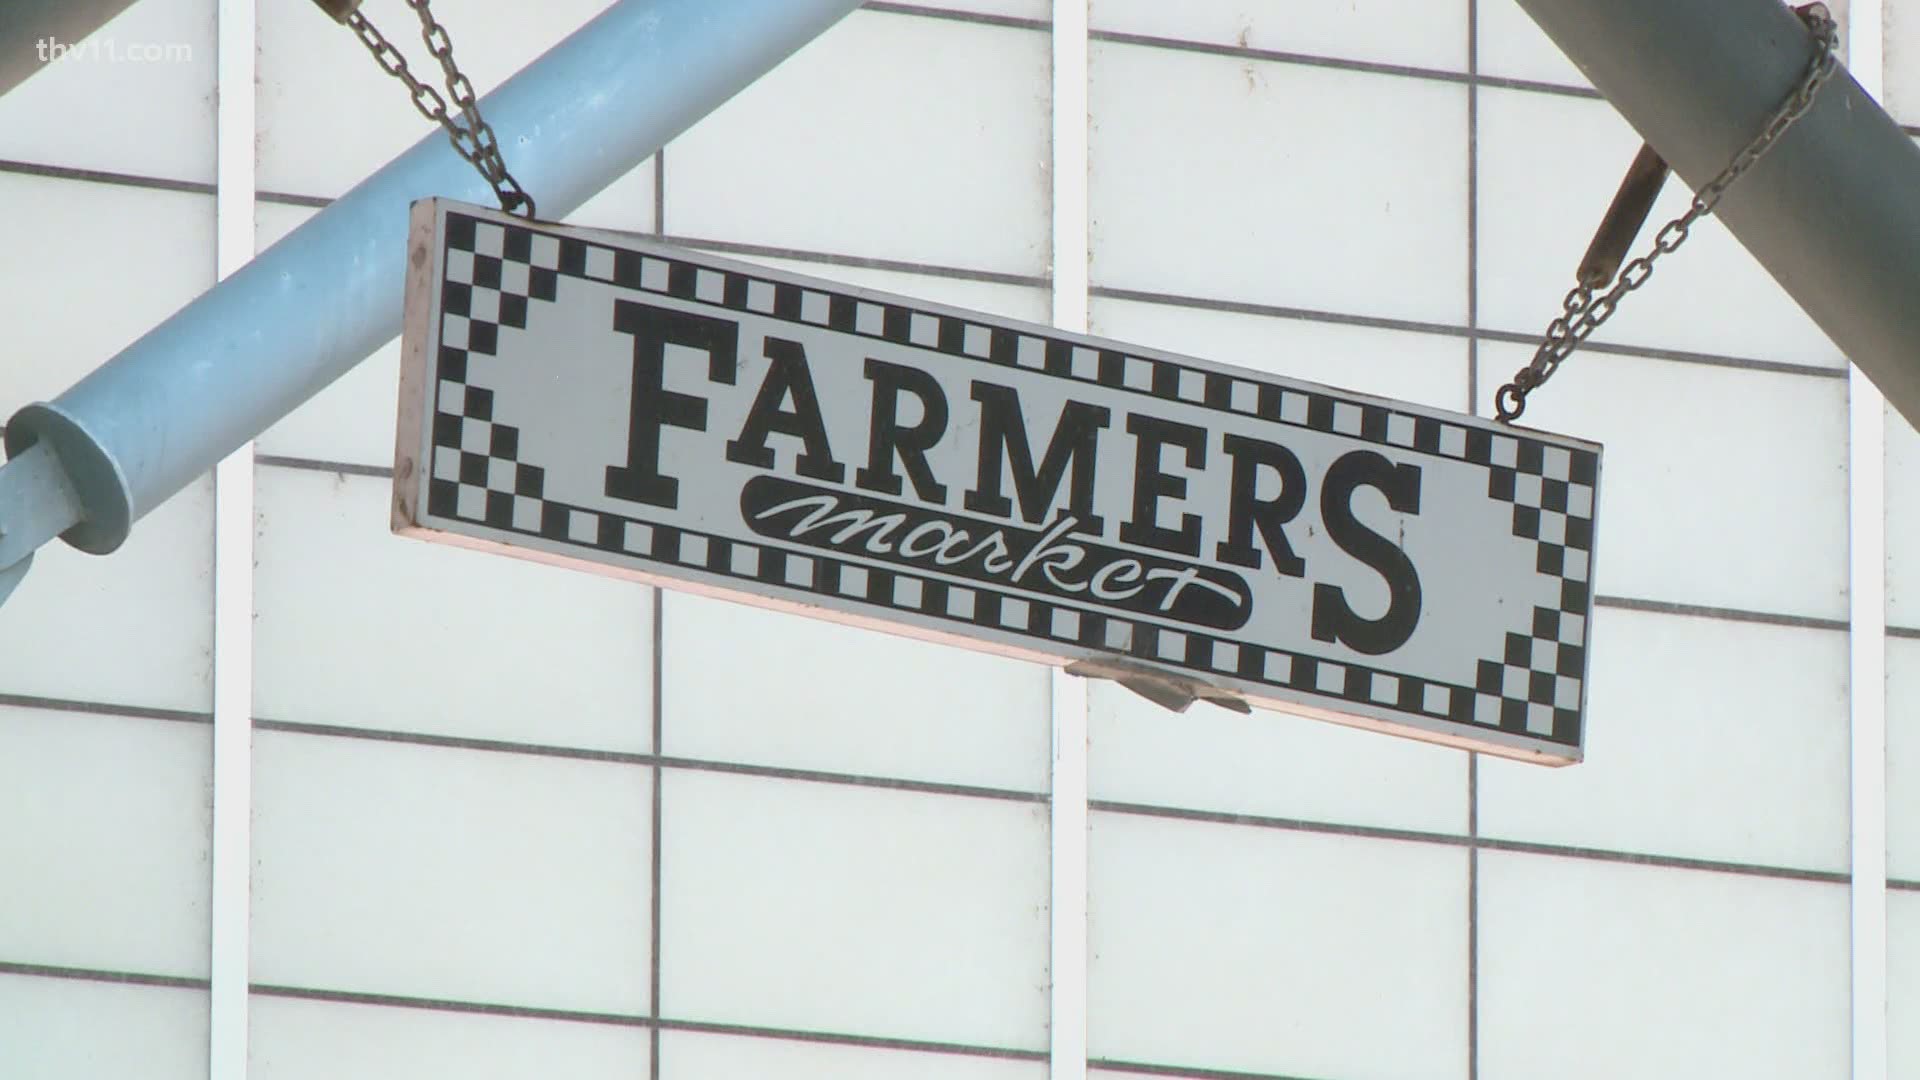 It's an exciting weekend for shoppers in Little Rock with the opening of the Little Rock Farmer's Market.